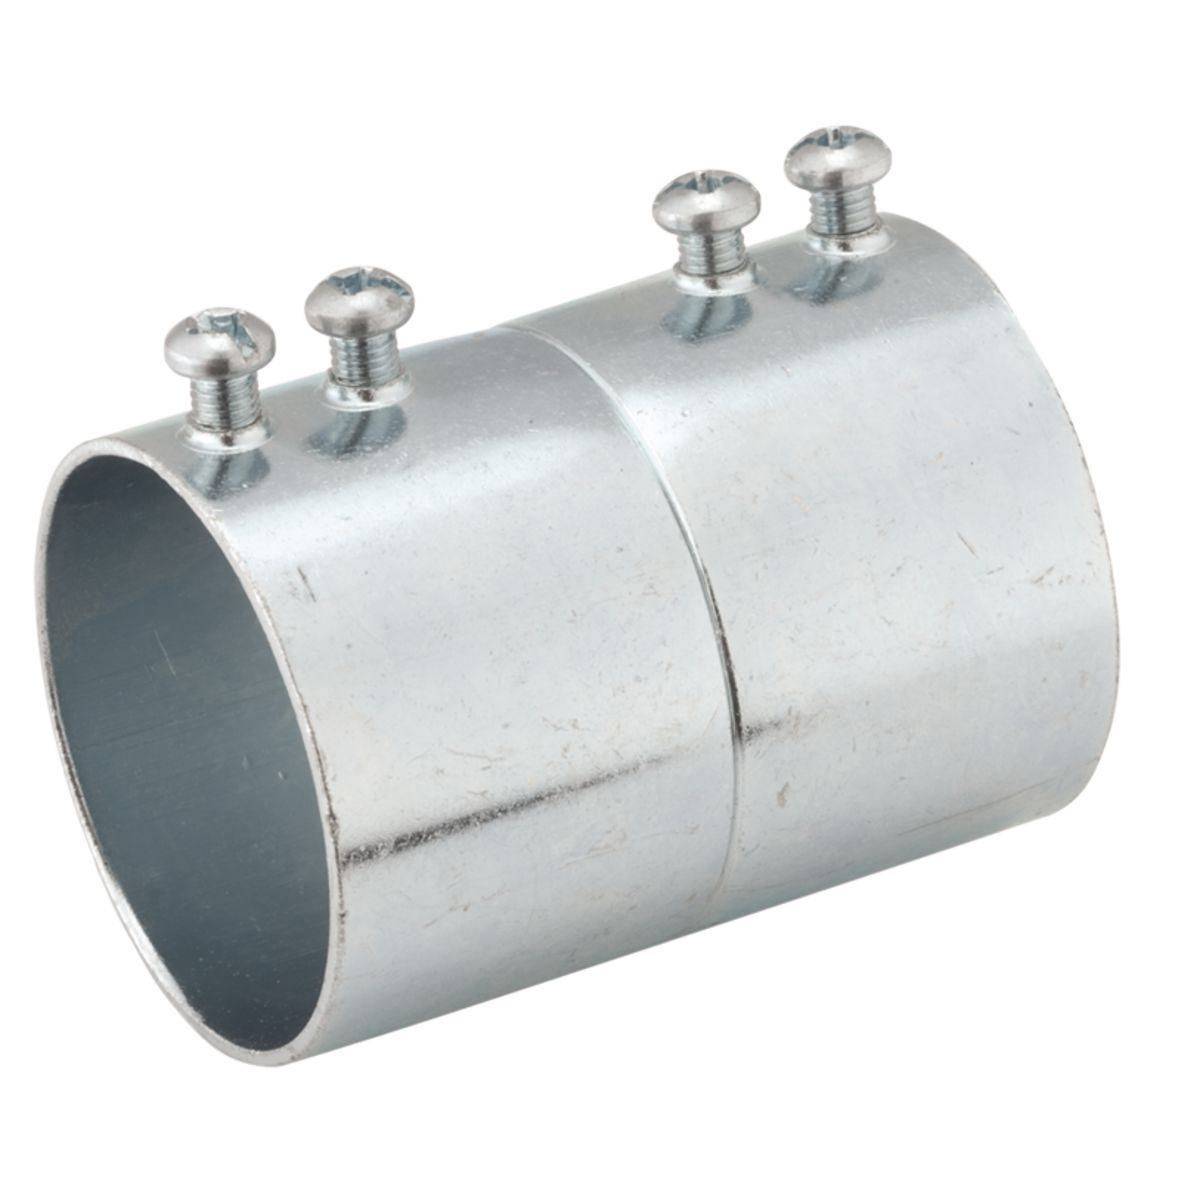 RACO® 2154 Setscrew Conduit Coupling, 3-1/2 in, For Use With EMT/IMC/Rigid Conduit, Steel, Electro-Plated Zinc